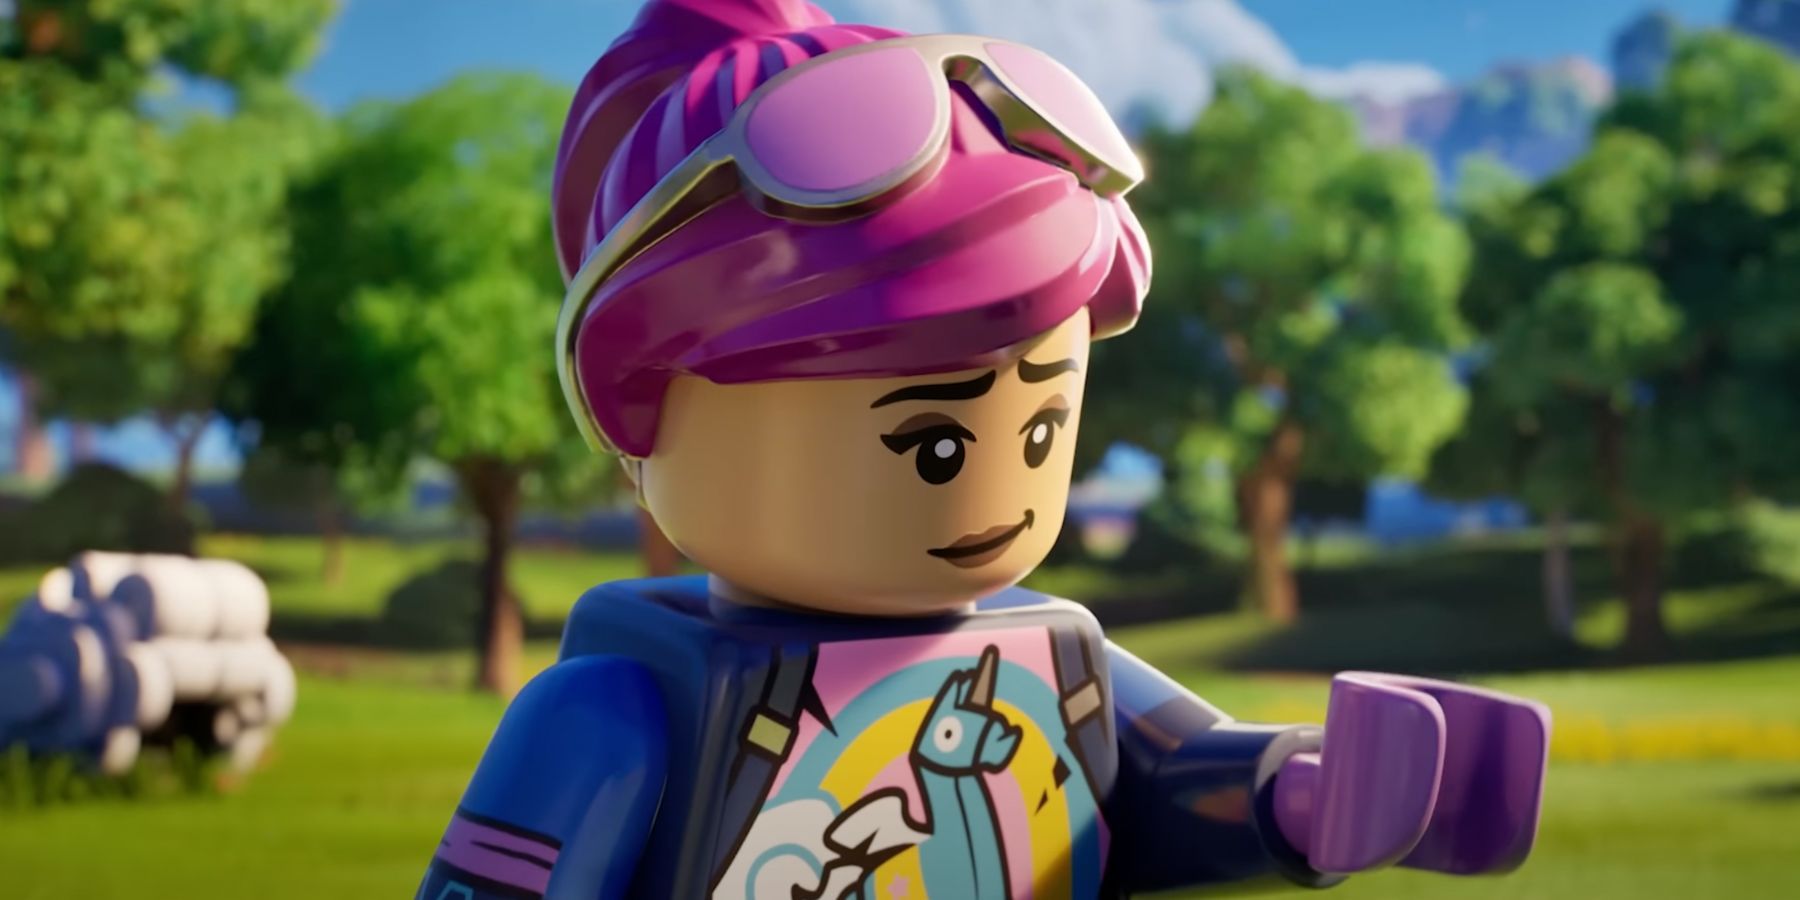 Lego Fortnite: How to Fix 'Can't Select World' Error